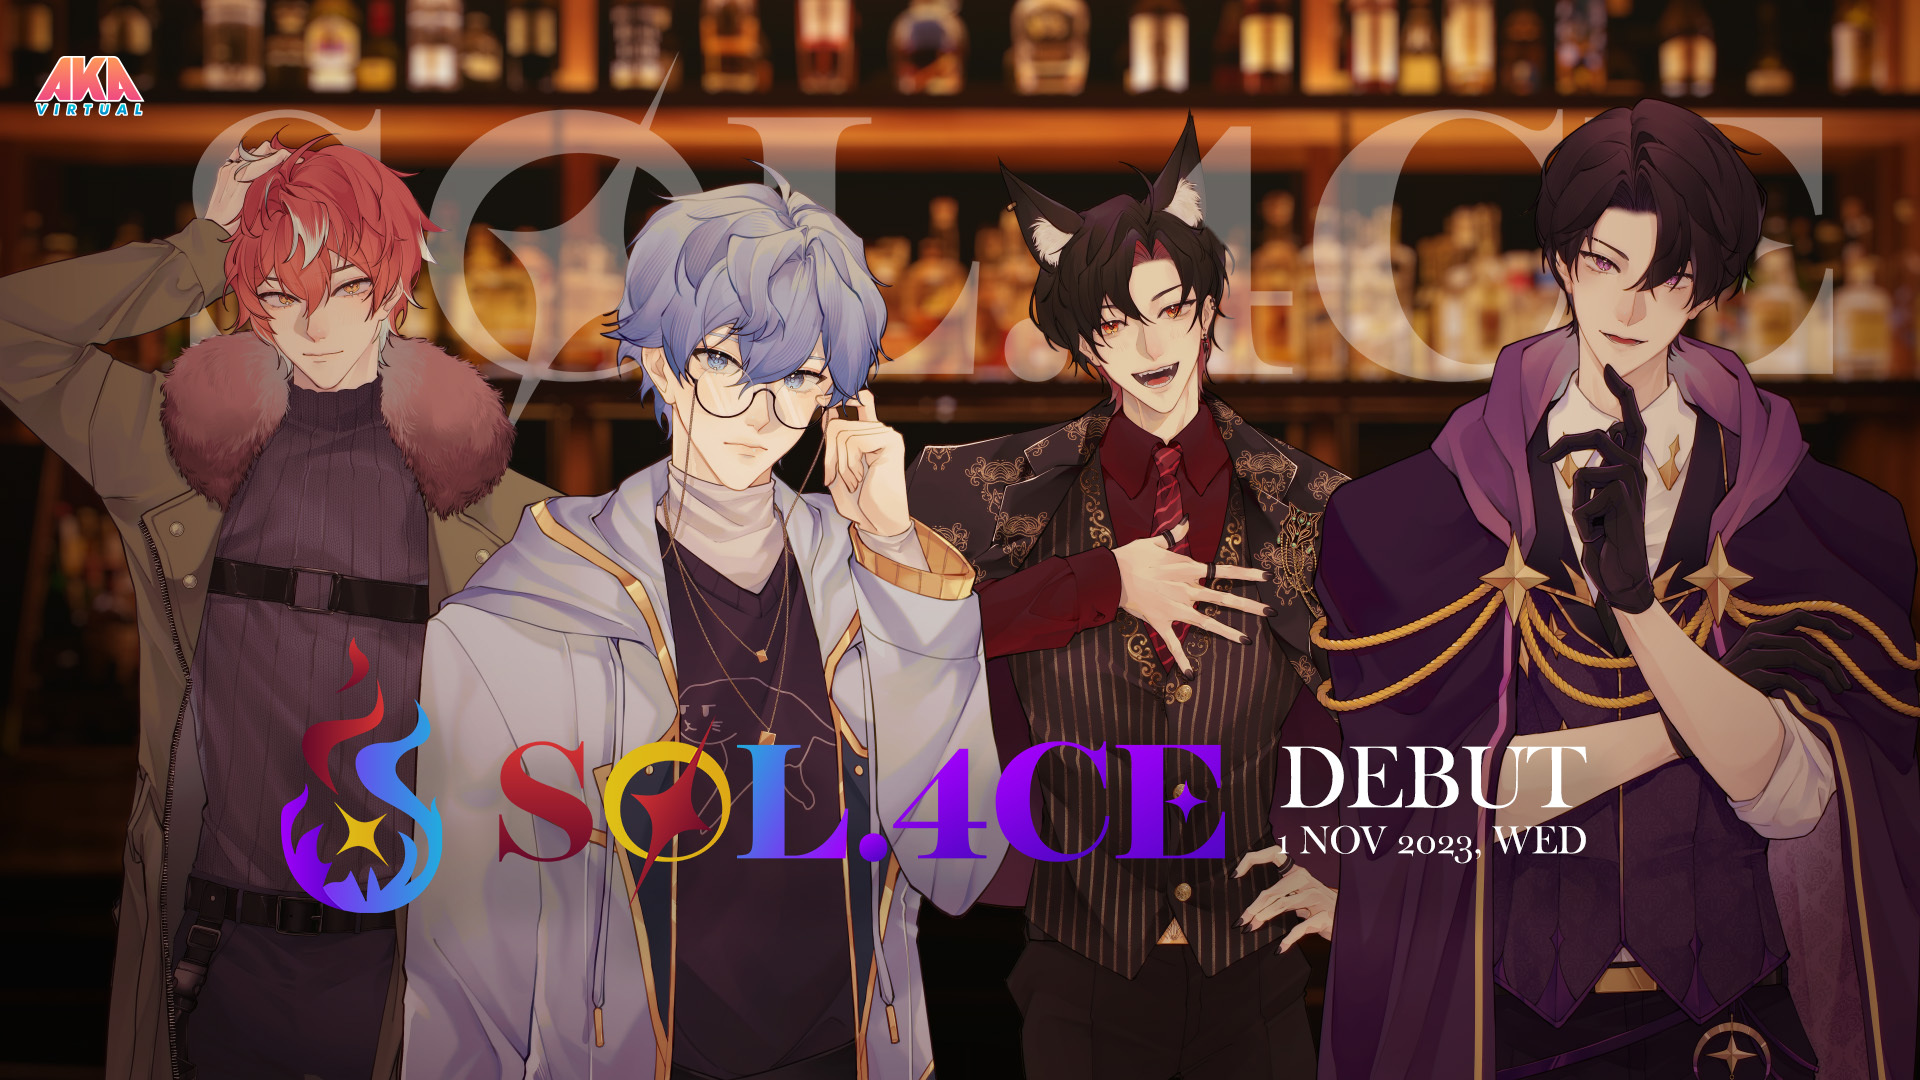 AKA Virtual Launches Its First Male VTuber Group "SOL.4CE"